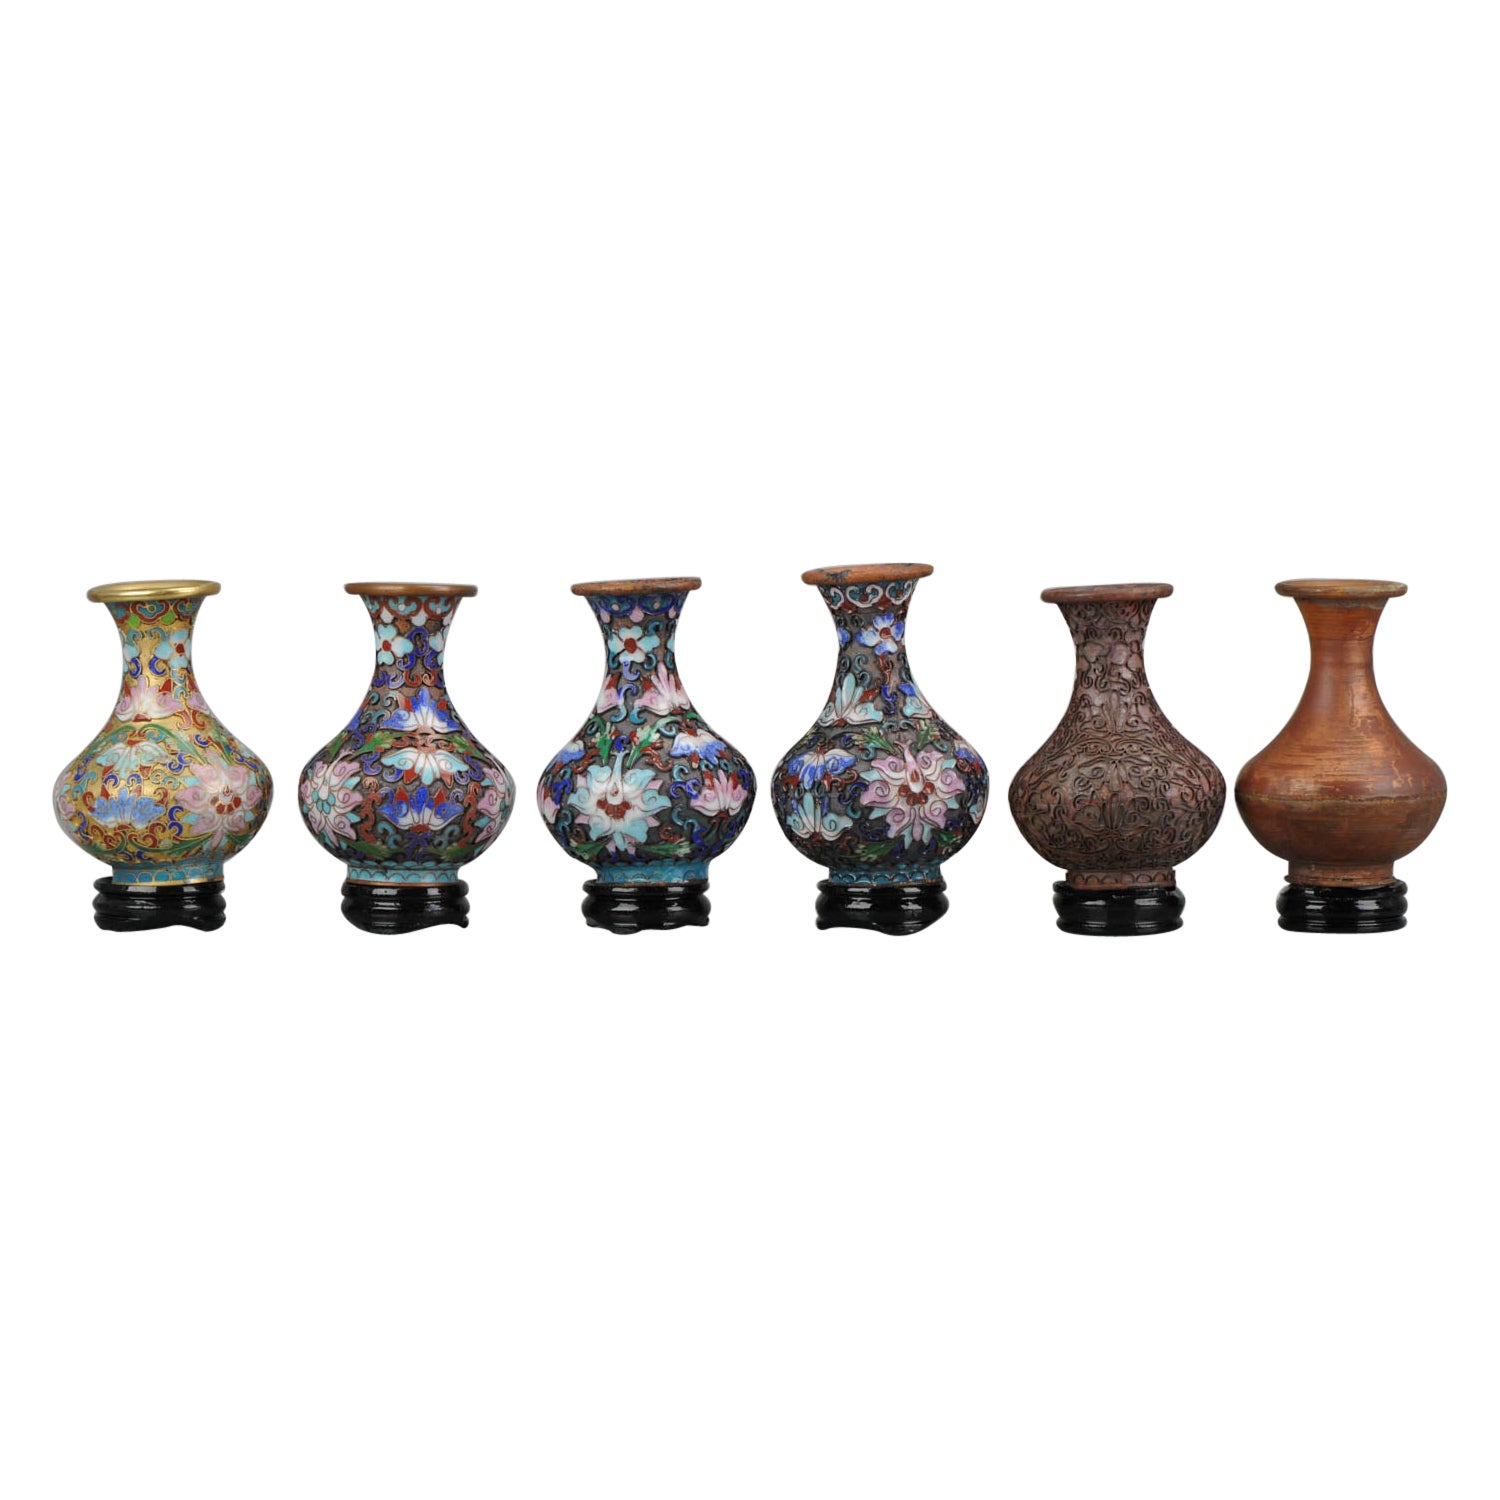 Set of 6 Chinese Manufacturing Process Colorfull Vase CLoisonne Enamel, 20th Cen For Sale